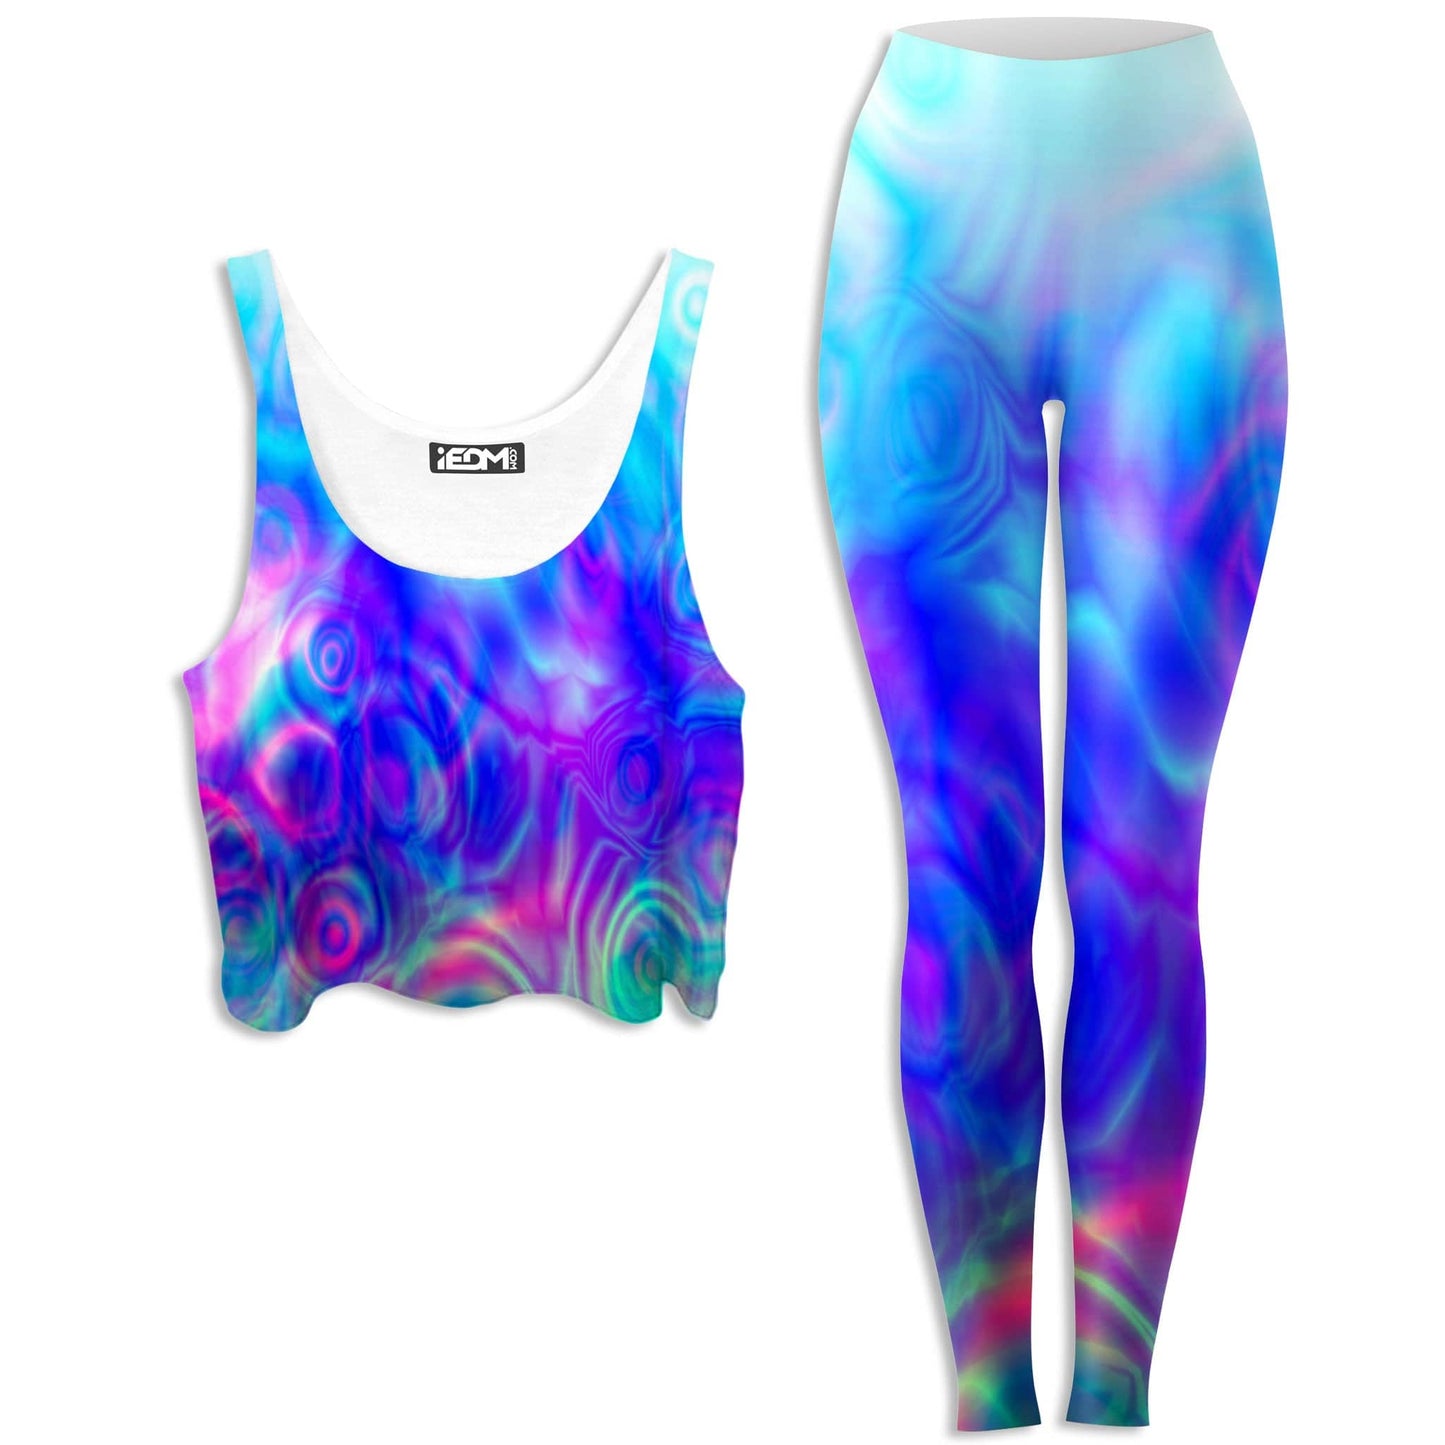 Tundra Candy Crop Top and Leggings Combo, Yantrart Design, | iEDM